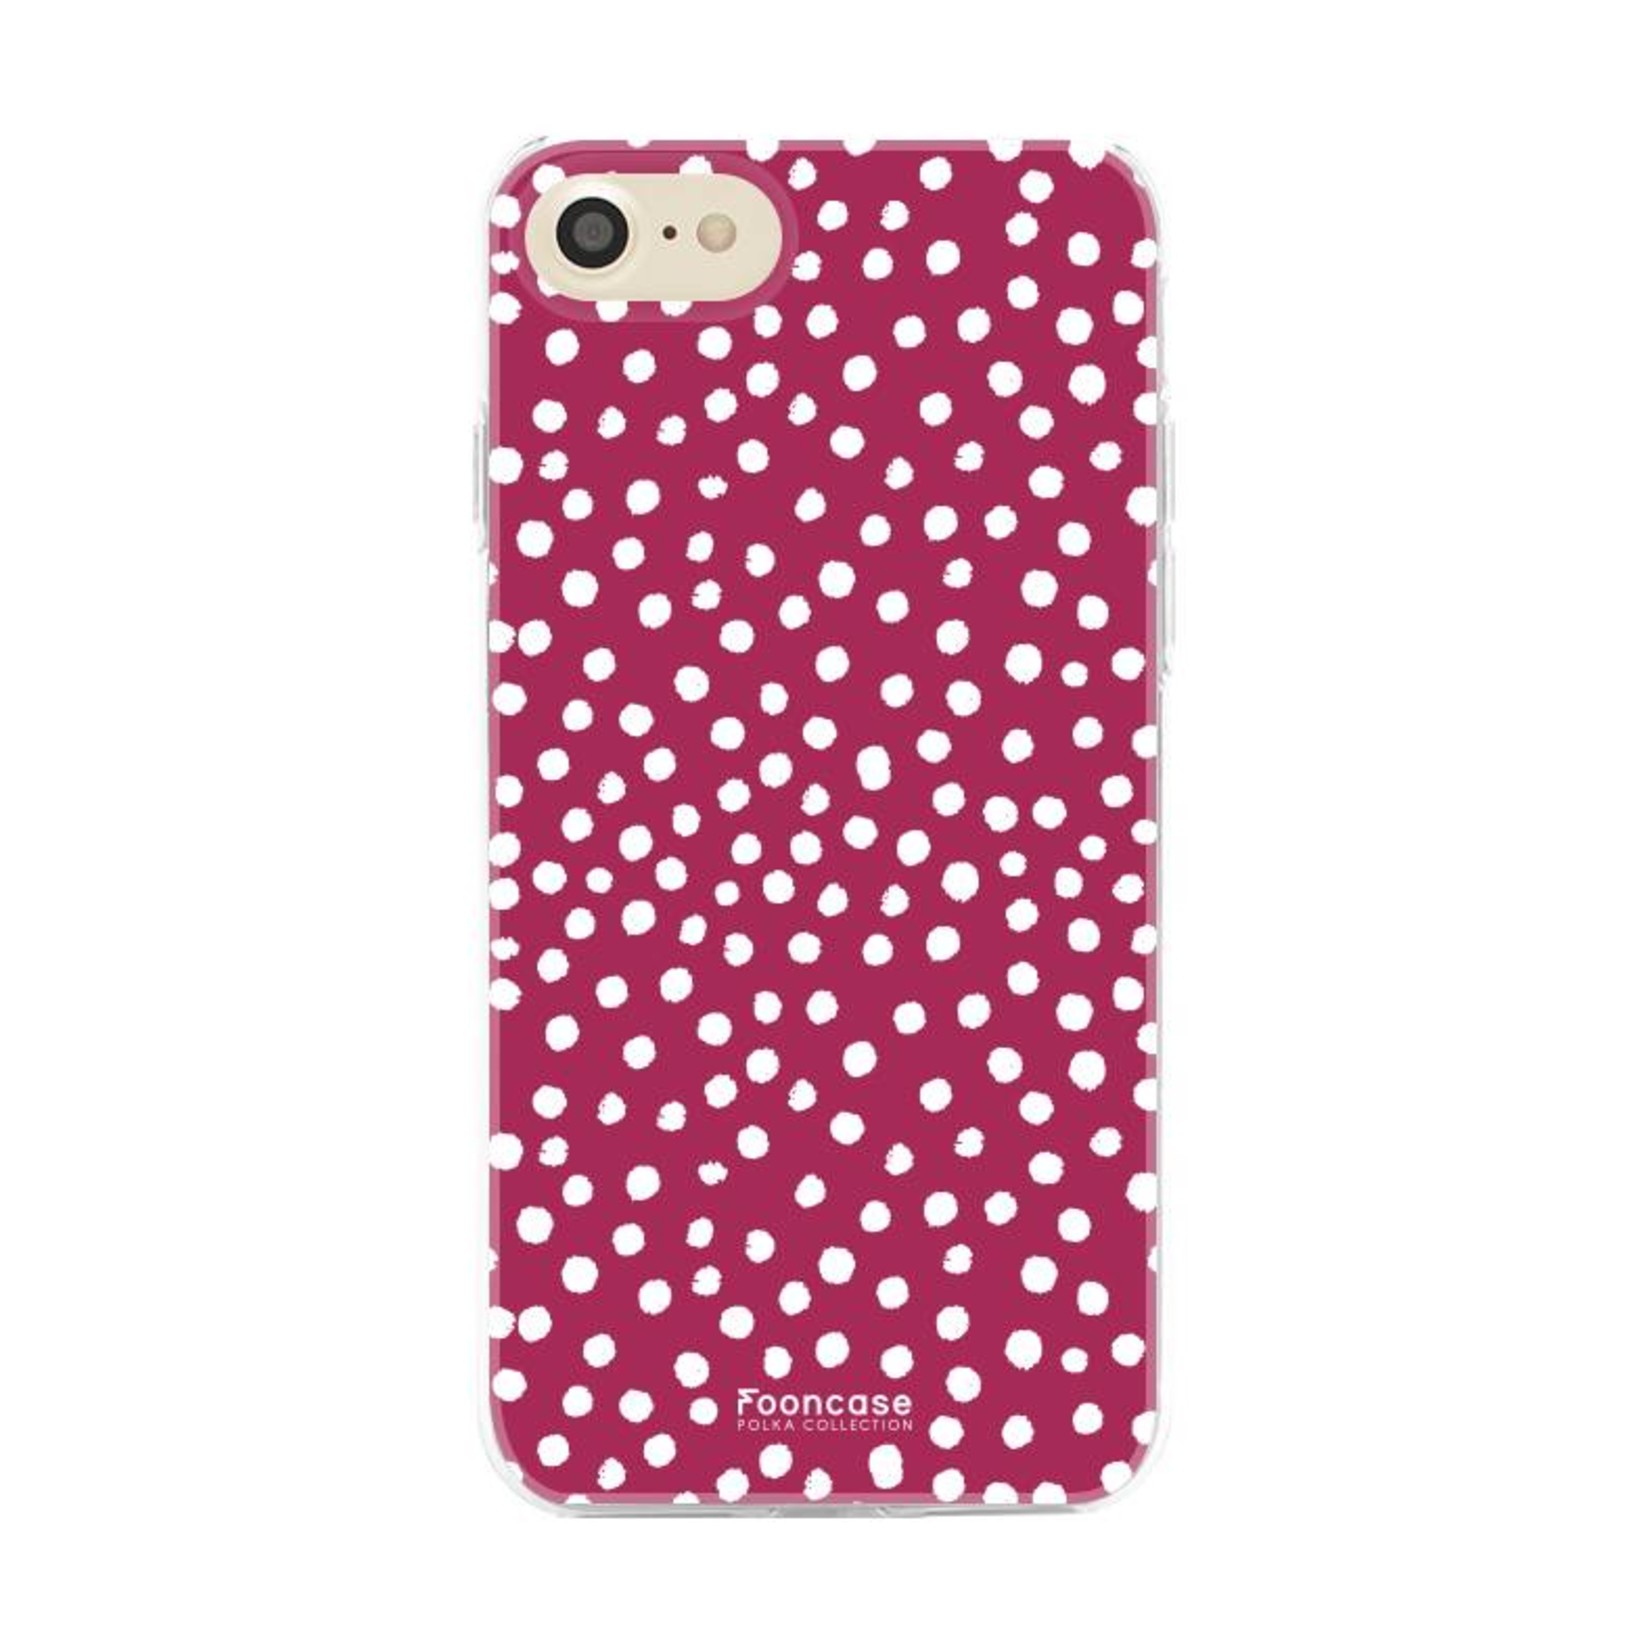 FOONCASE Iphone 8 - POLKA COLLECTION / Bordeaux Rot